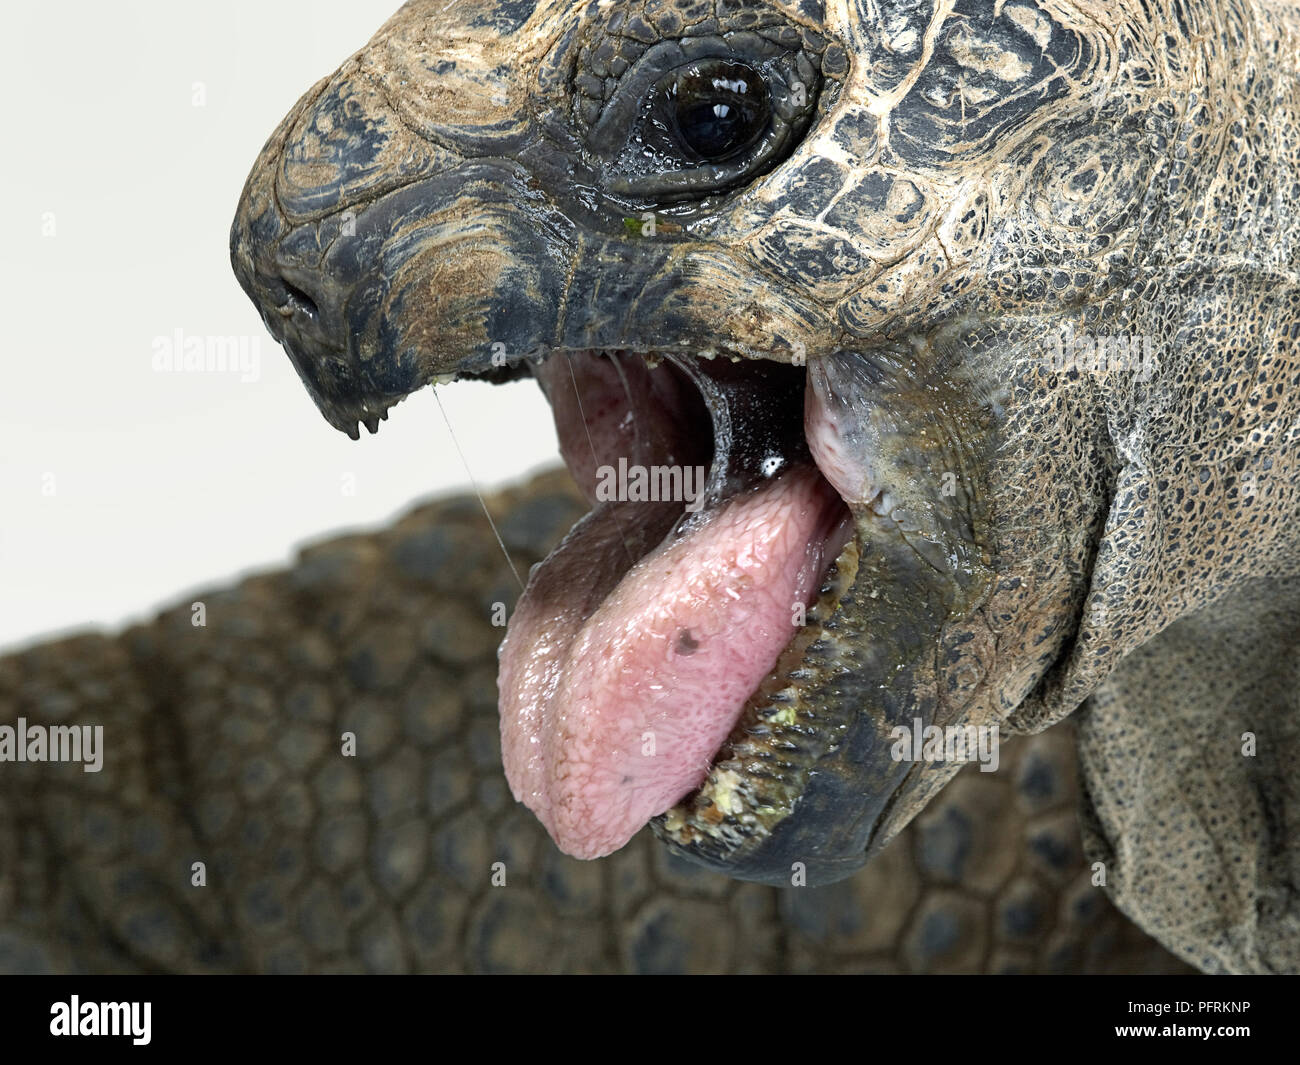 Aldabra giant tortoise (Aldabrachelys gigantea), close-up of a tortoise  head, mouth wide open and tongue sticking out Stock Photo - Alamy